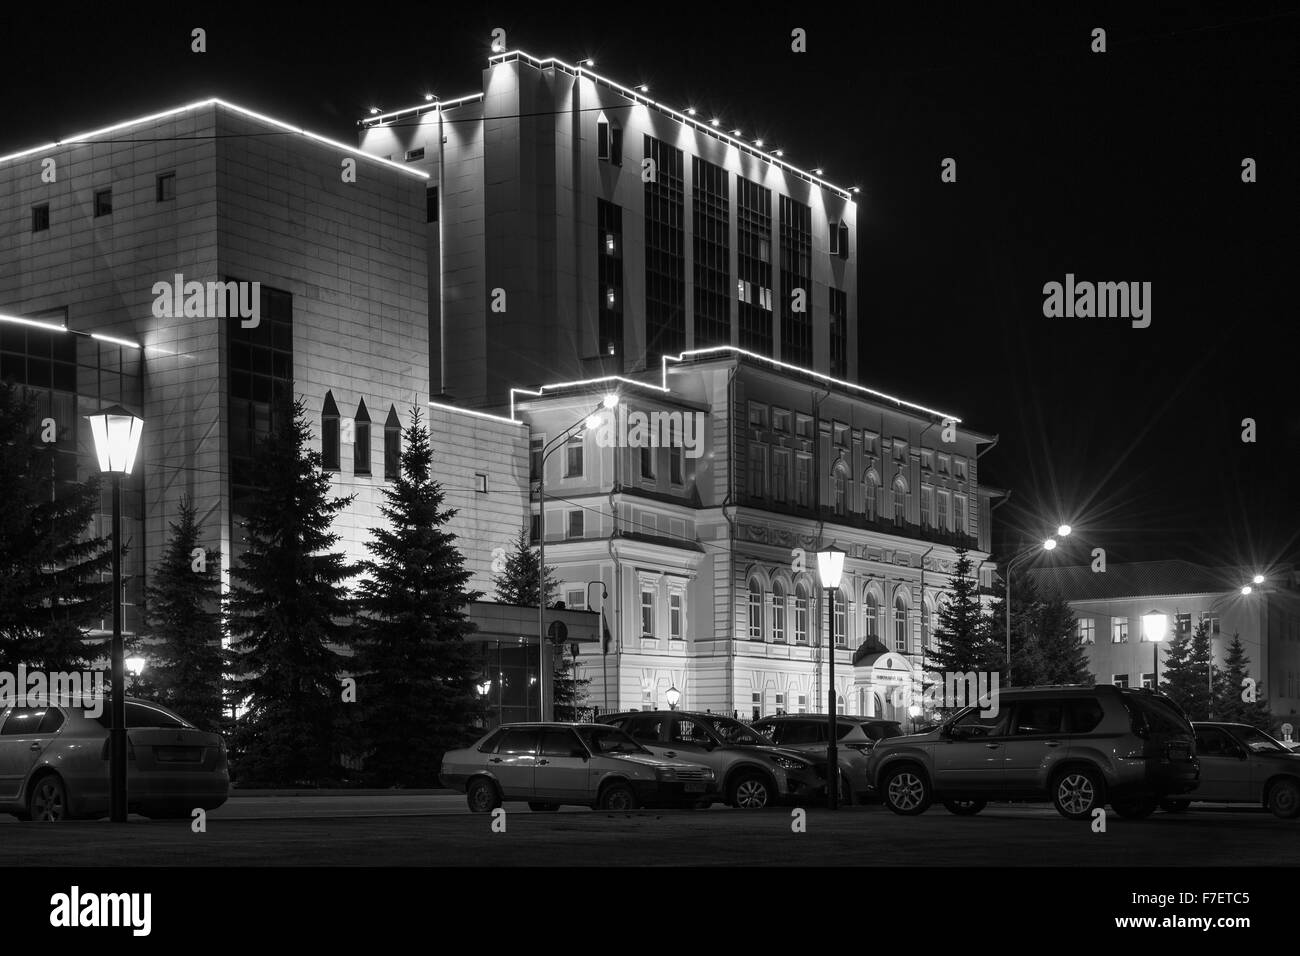 Well lit and bright building illuminated by nightlights in a modern urban  city environment Stock Photo - Alamy